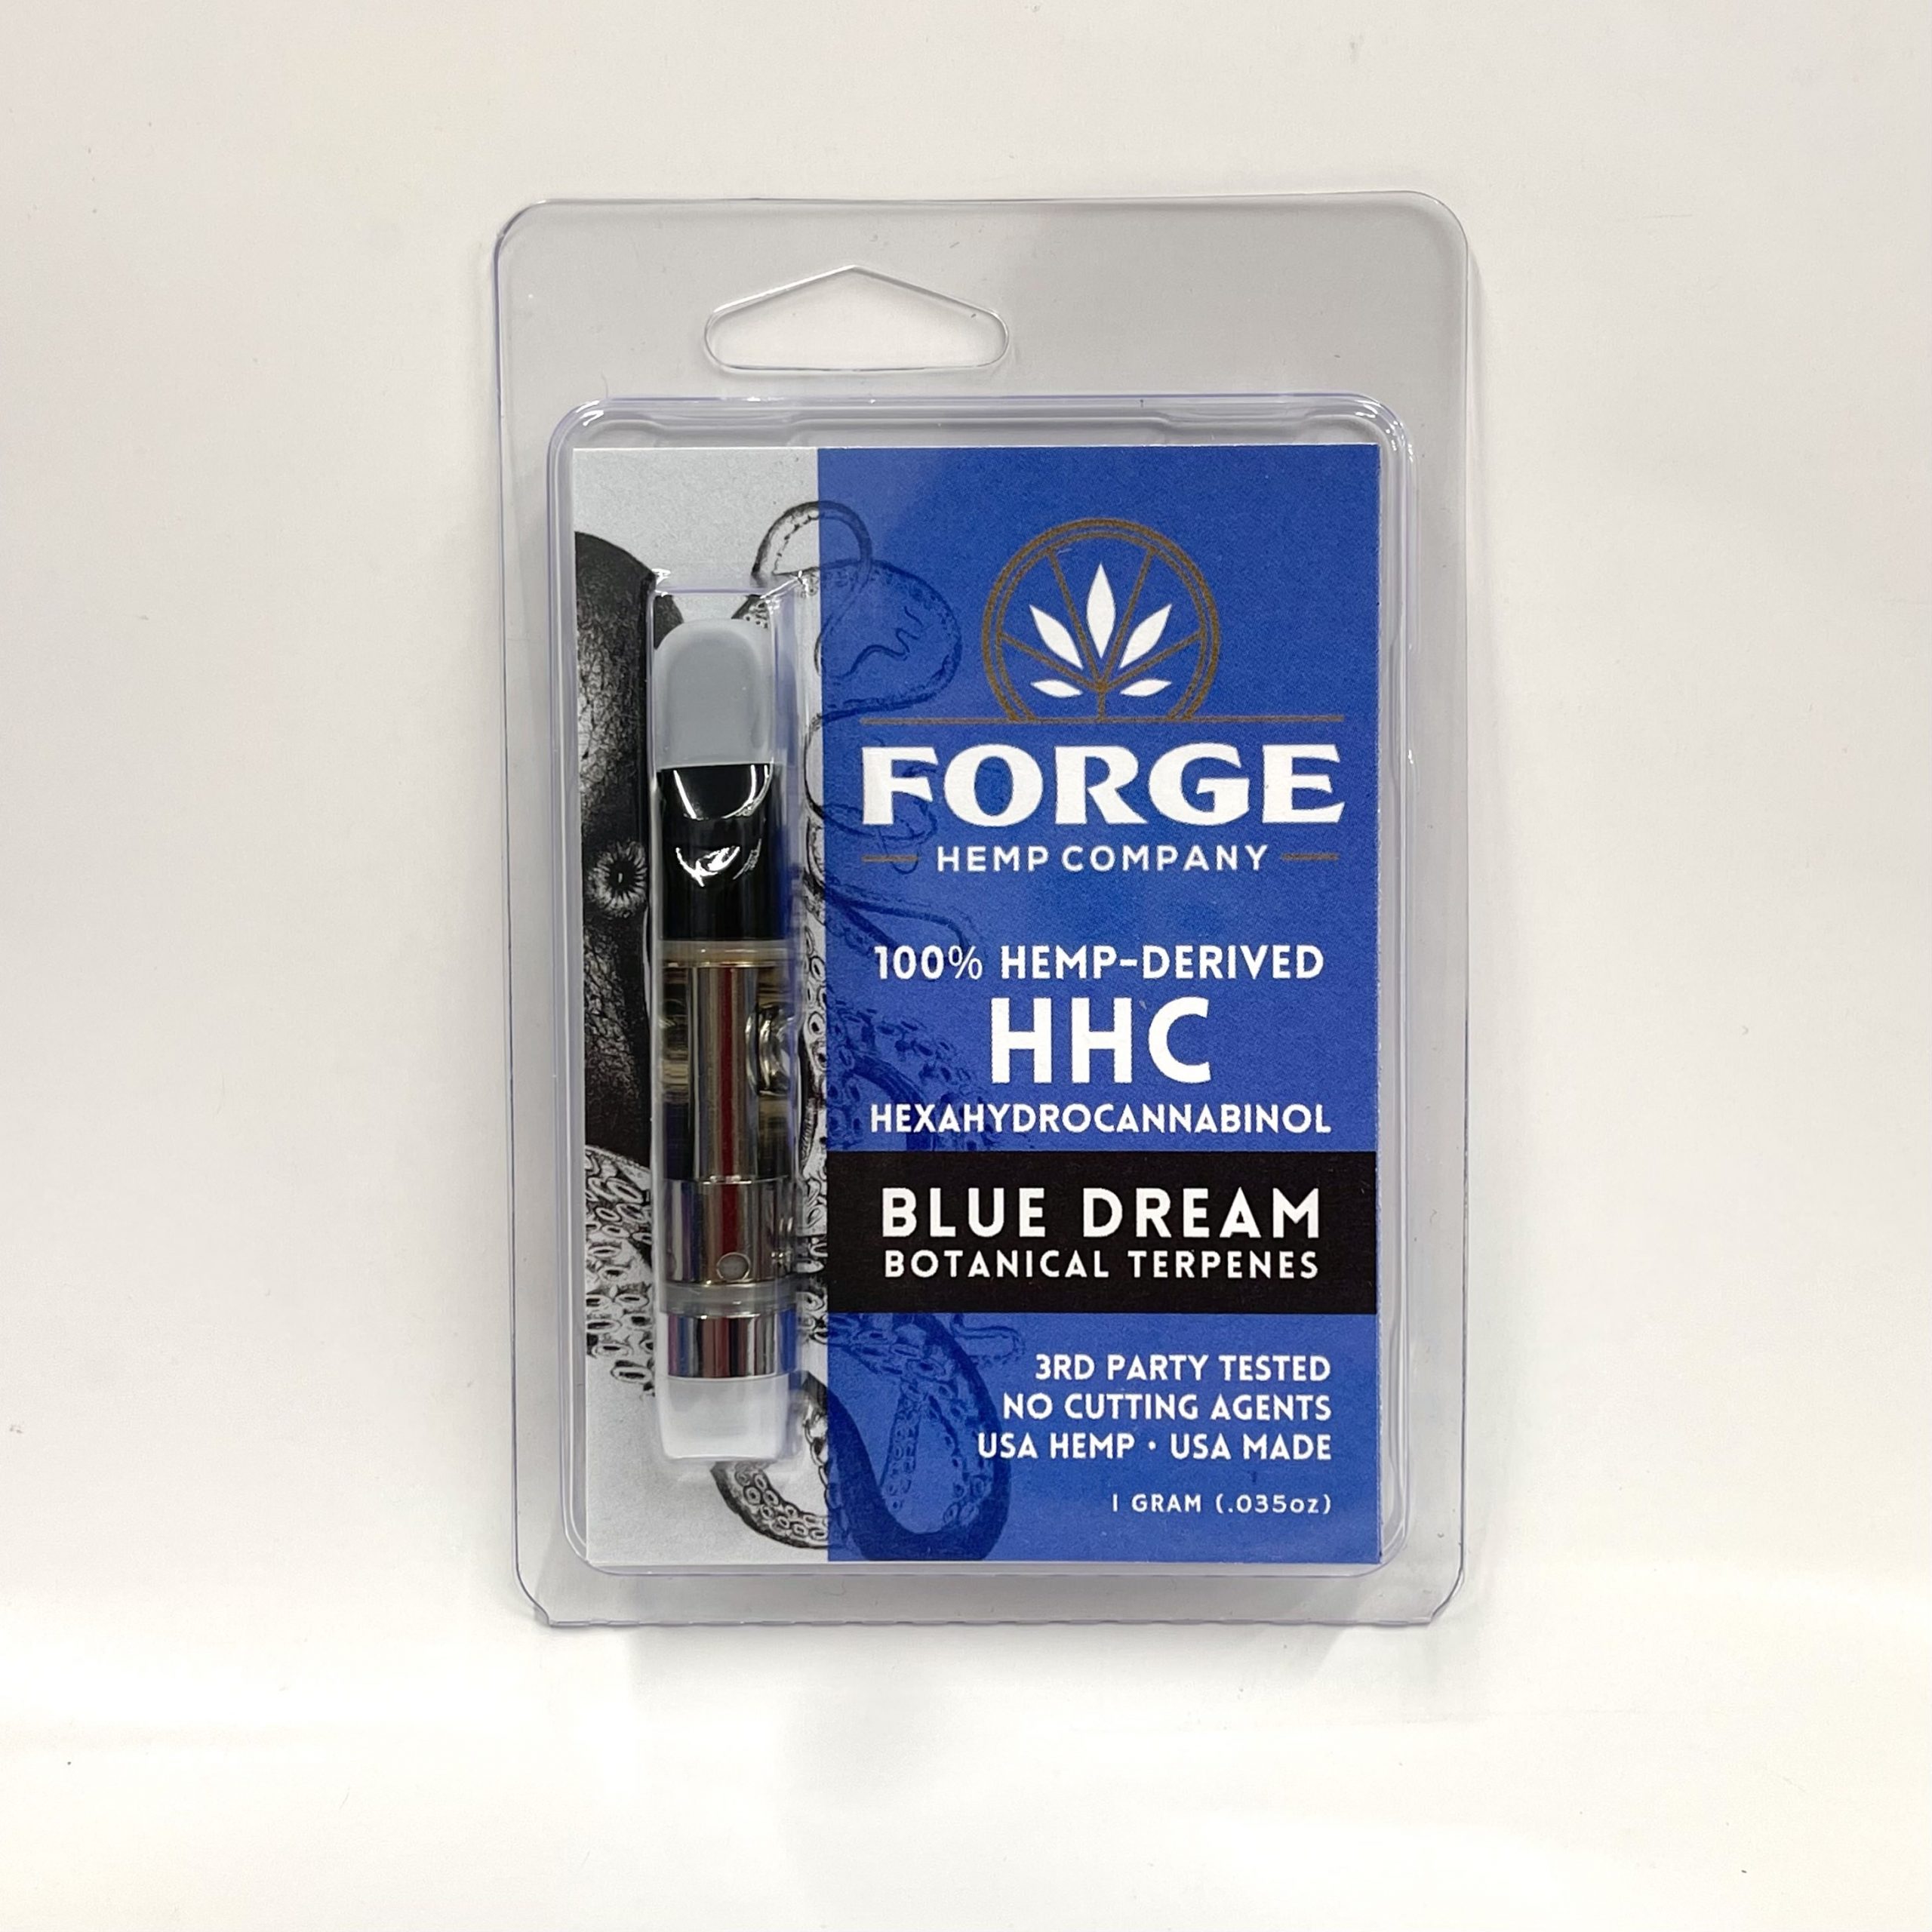 HHC with Blue Dream Botanical Terpenes